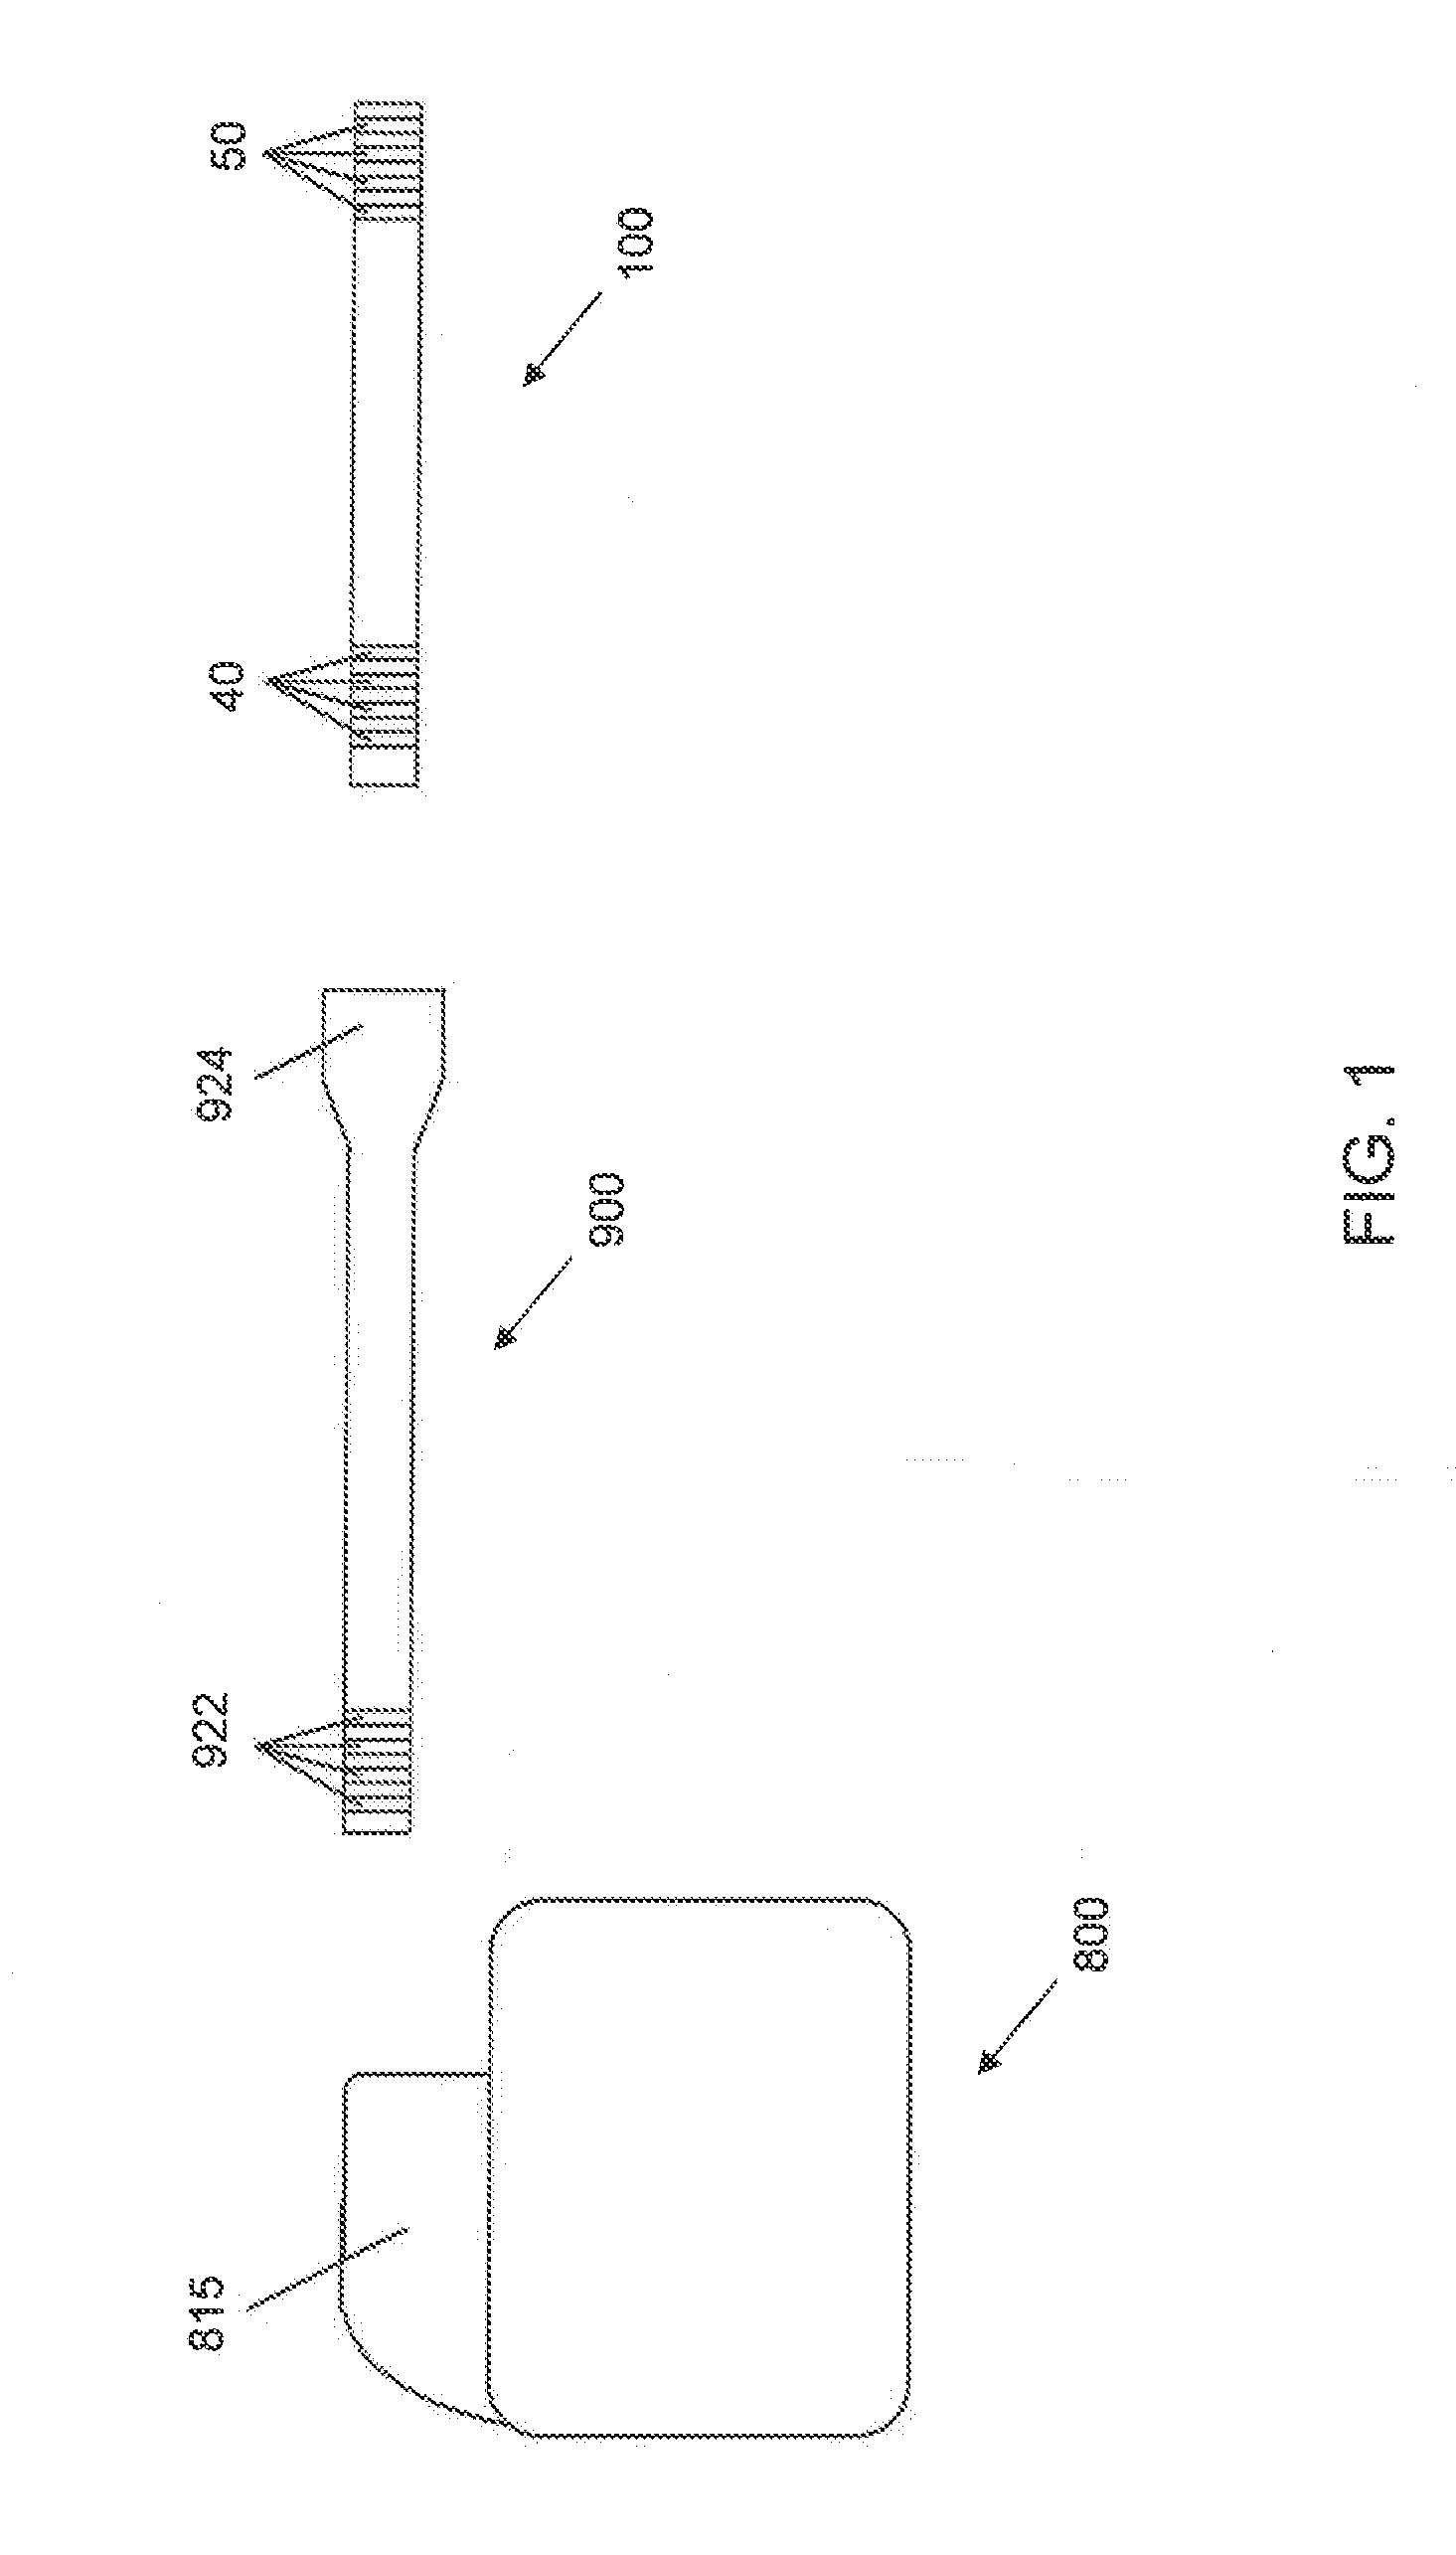 System and method for implanting a paddle lead